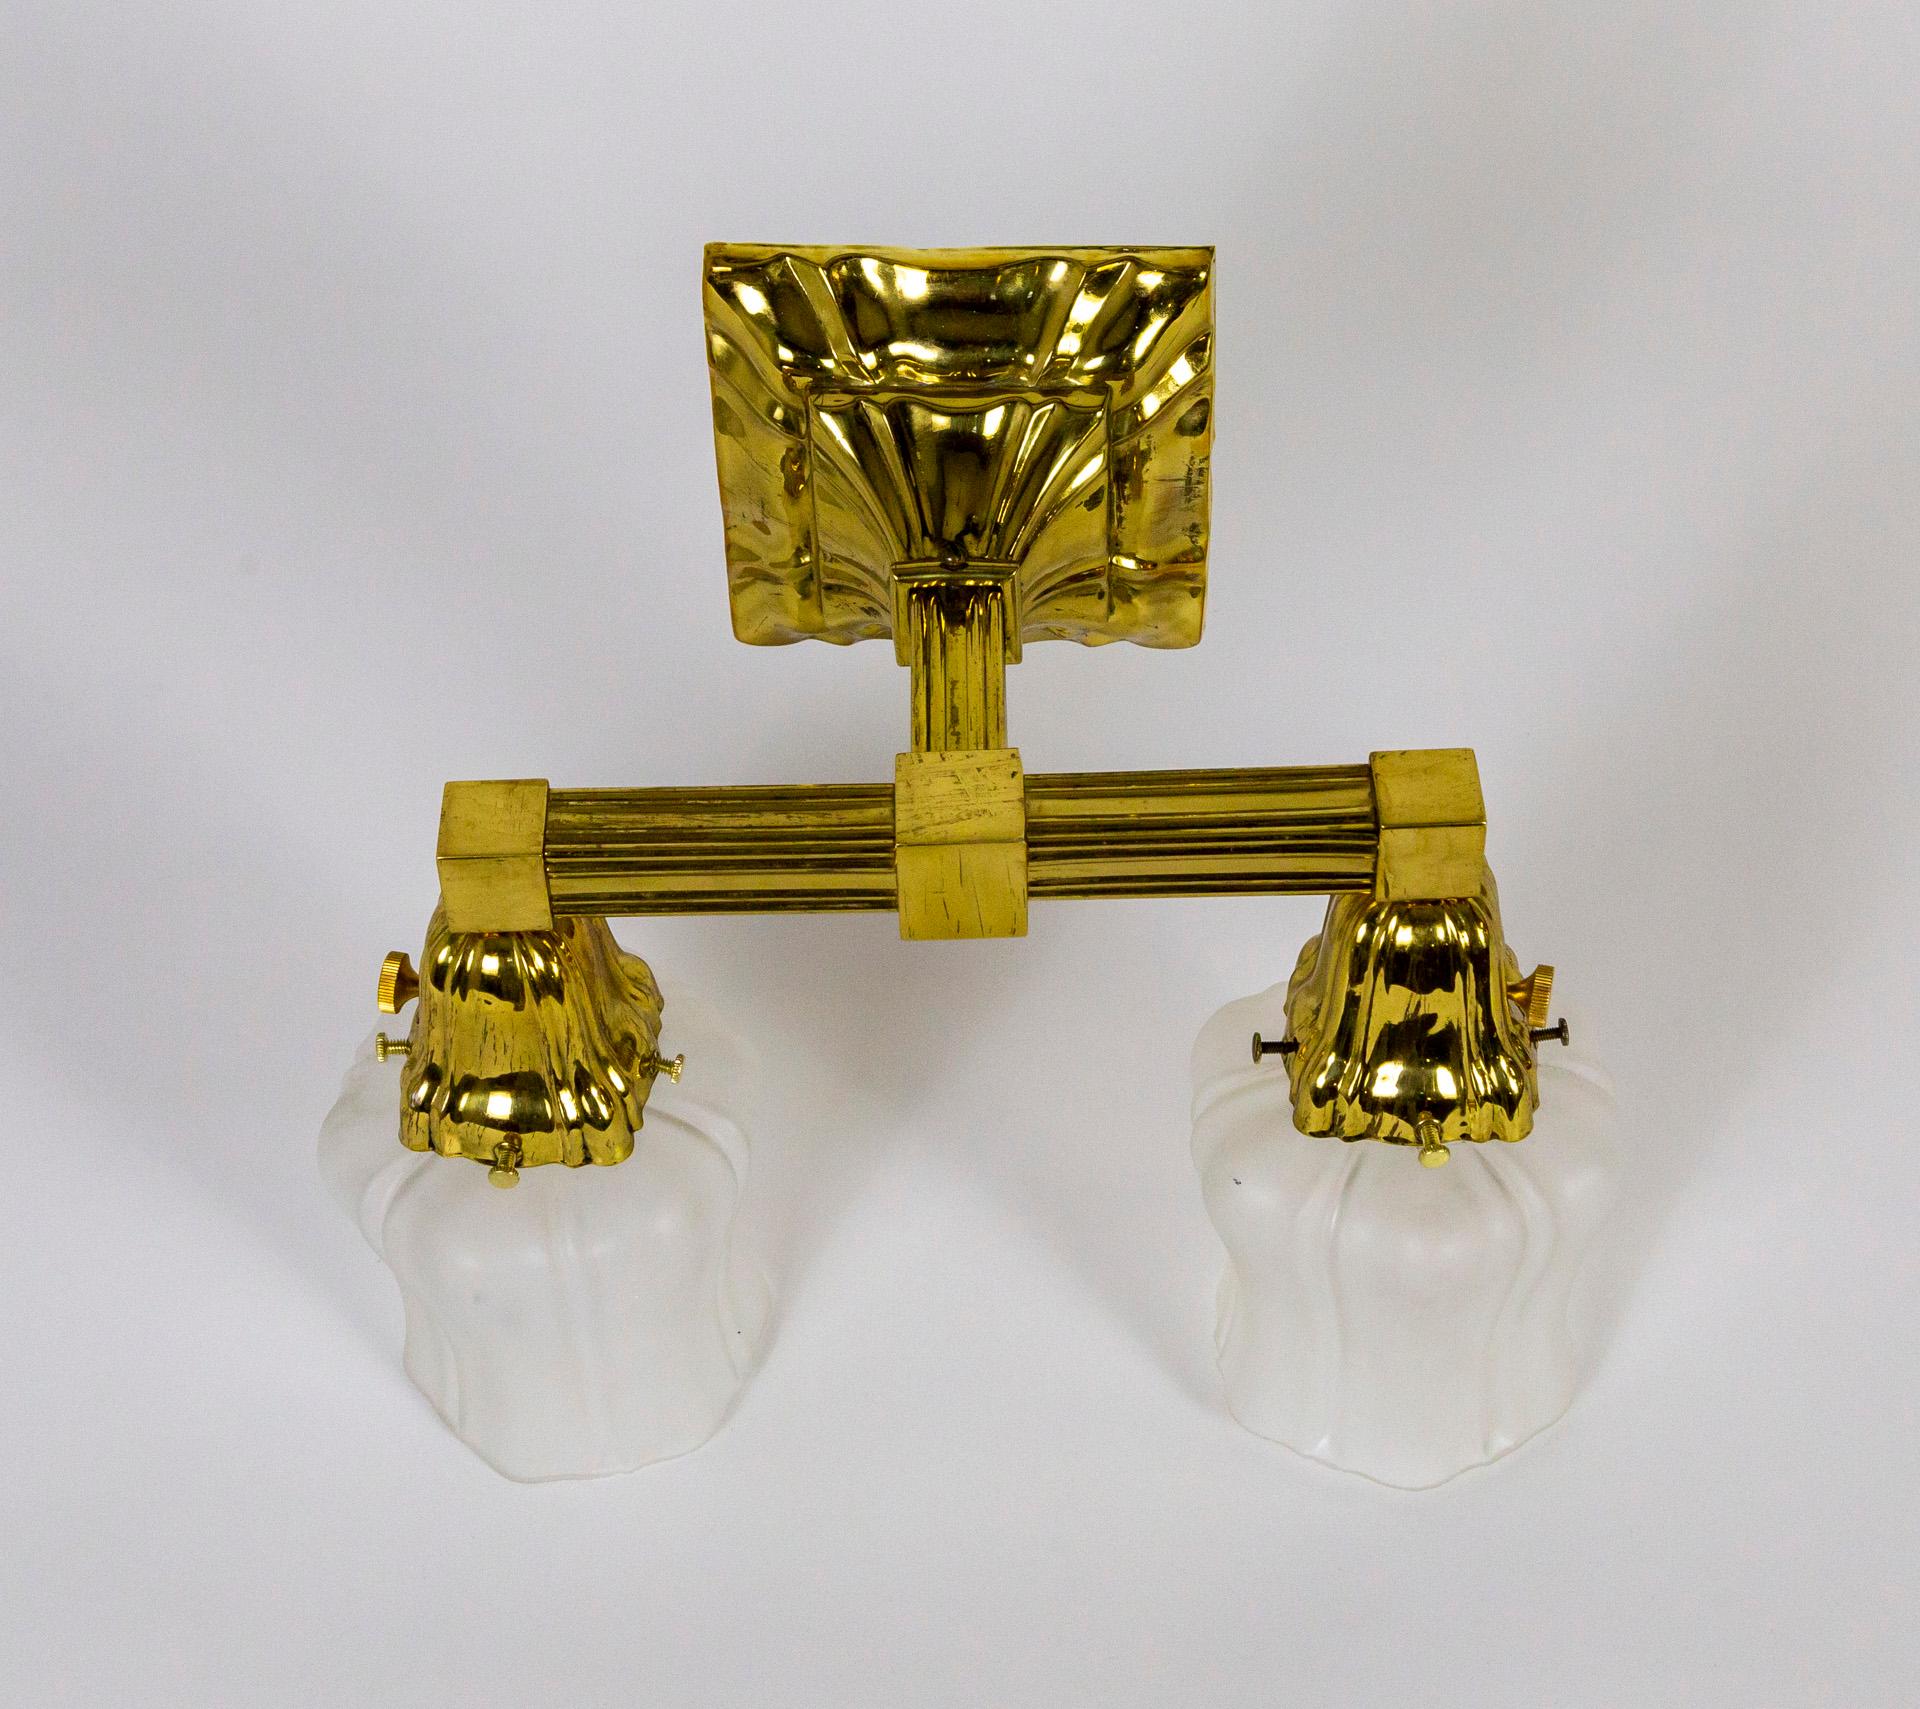 A brass, 2-arm, Sheffield style sconce from the 1930s. With frosted glass shades in a tapered, bellflower shape. With independent switches on the sockets. Newly wired. 12.75